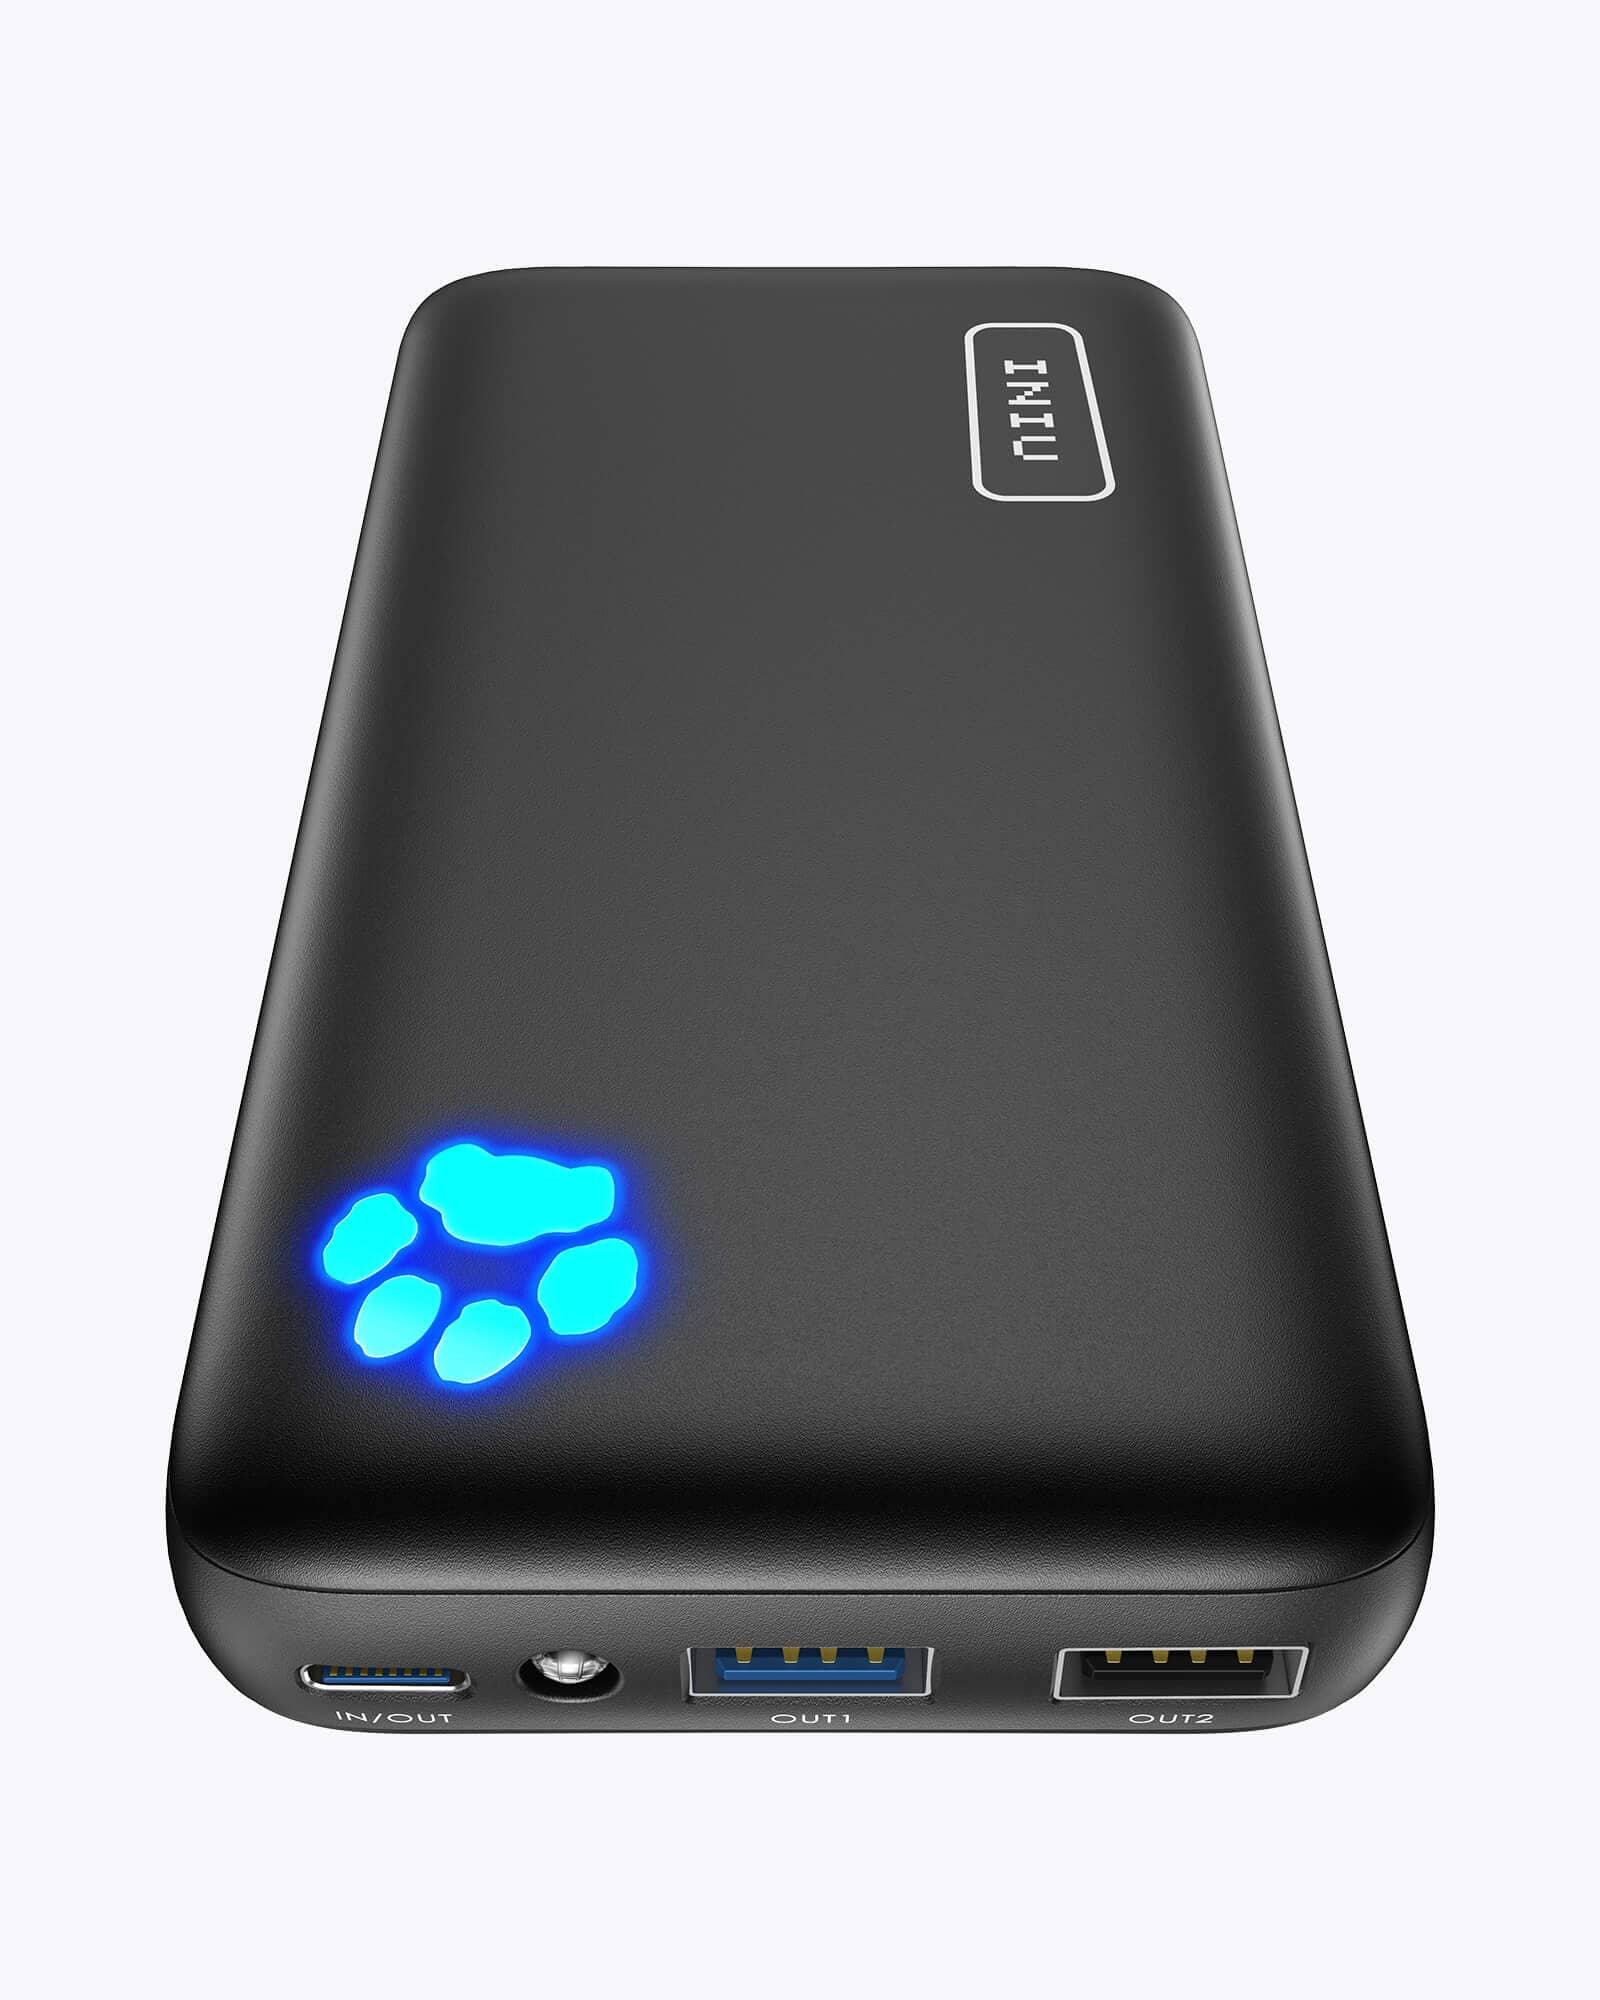 INIU Power Bank 20W PD3.0 QC4.0 Fast Charging 20000mAh Portable Charger  review - Which?